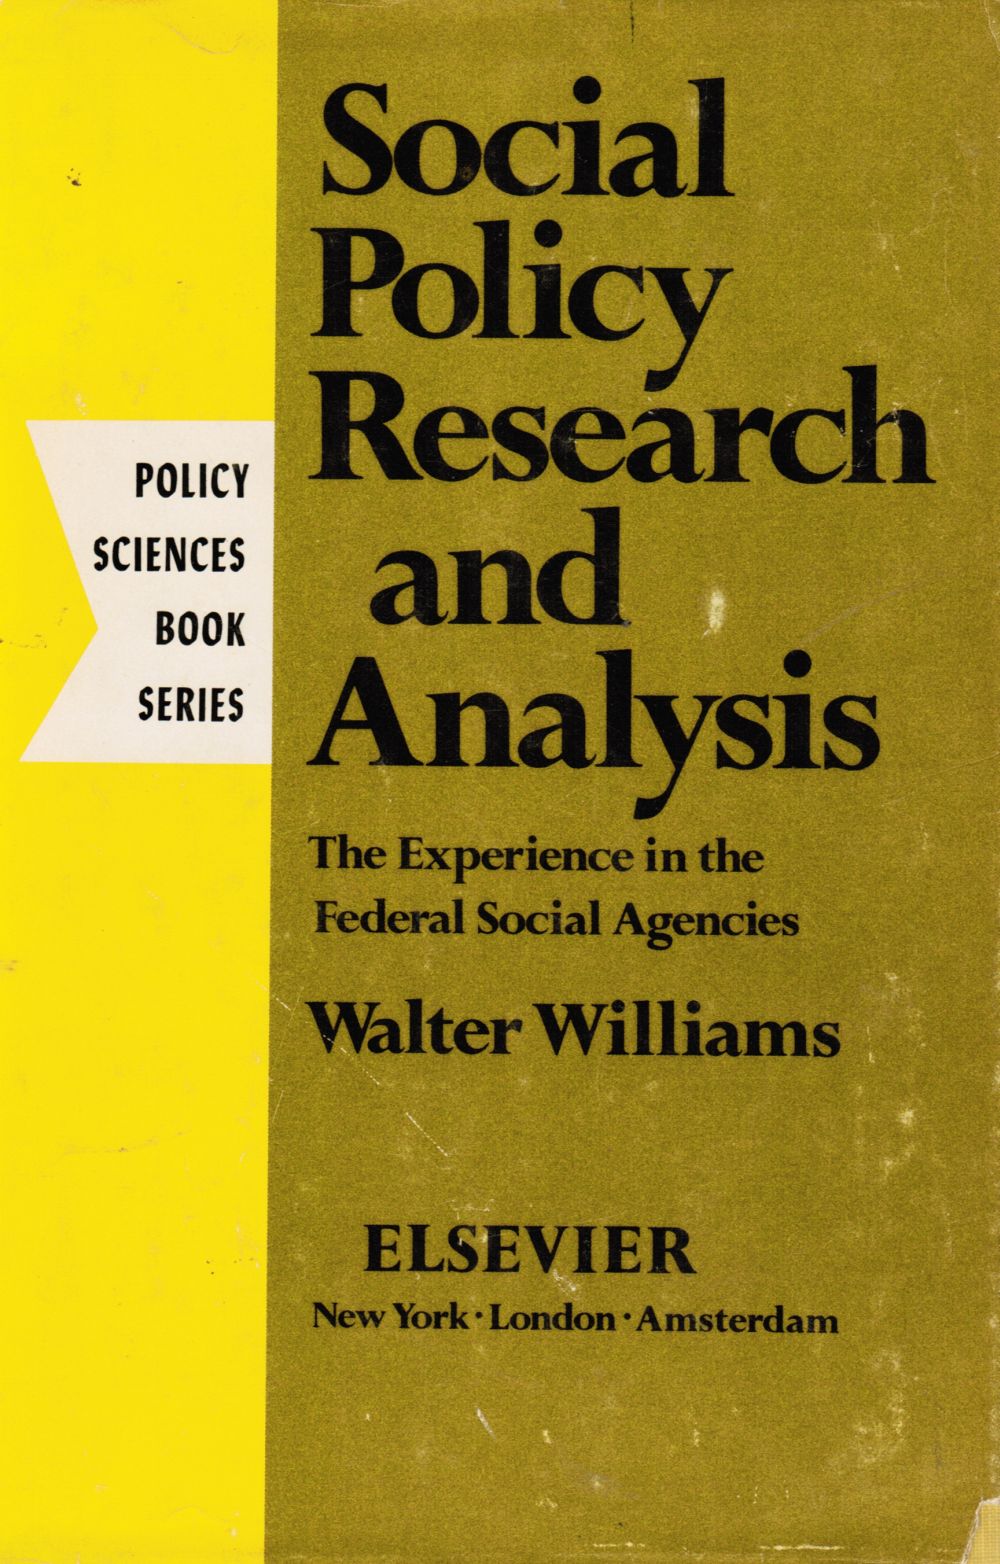 WILLIAMS, WALTER - Social Policy Research and Analysis: The Experience in the Federal Social Agencies